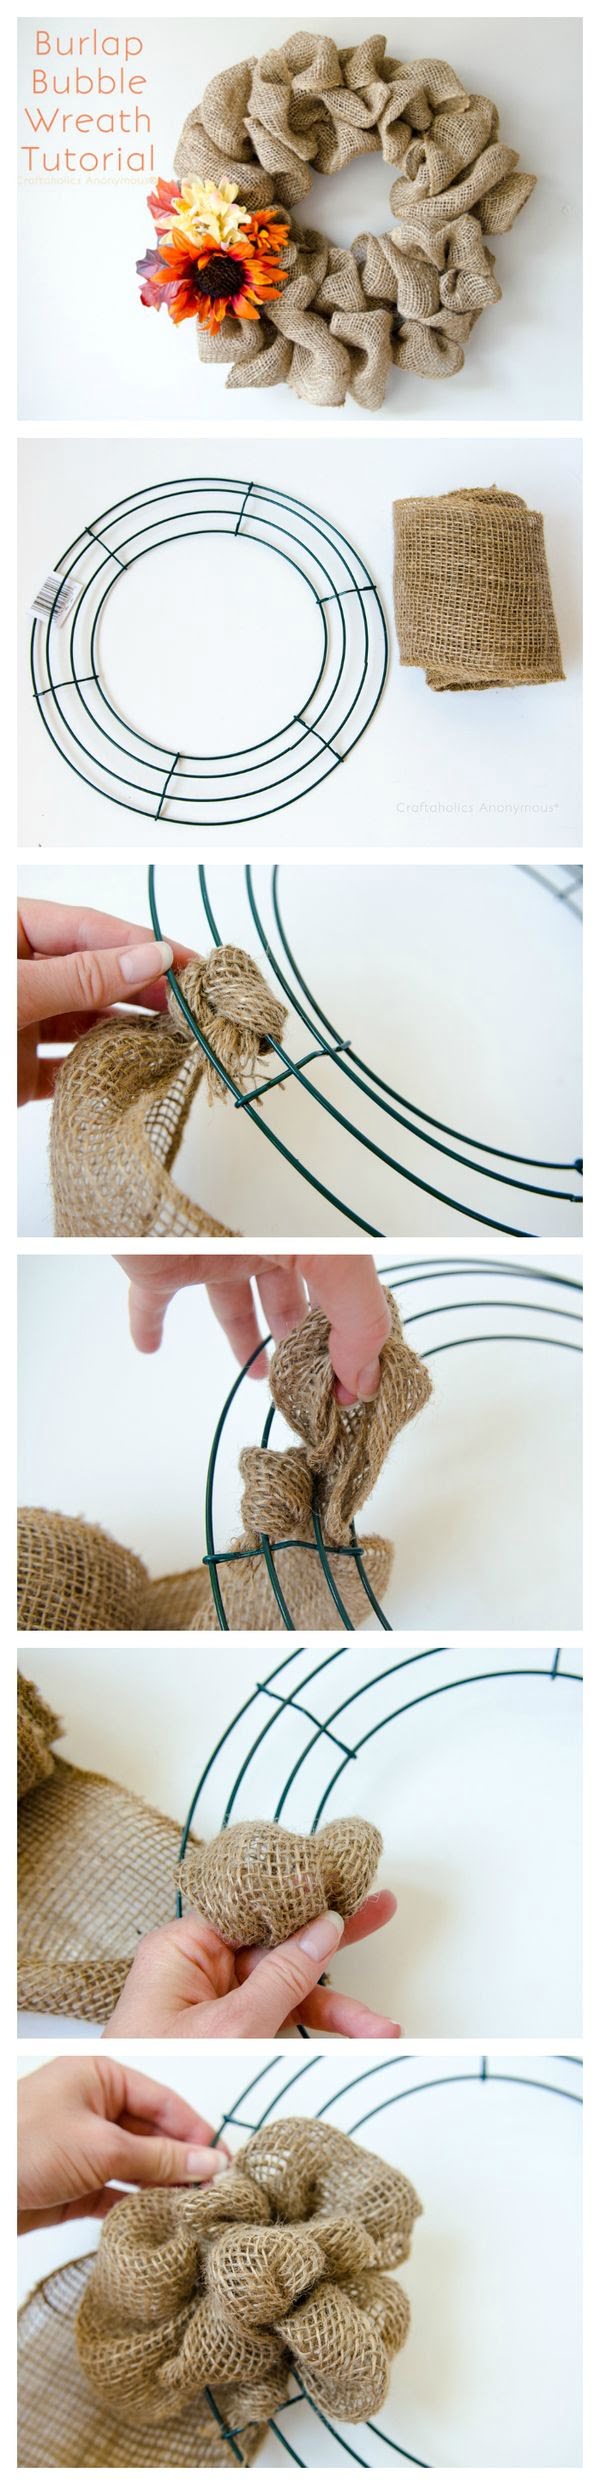 Check out how to make this easy DIY Burlap Wreath